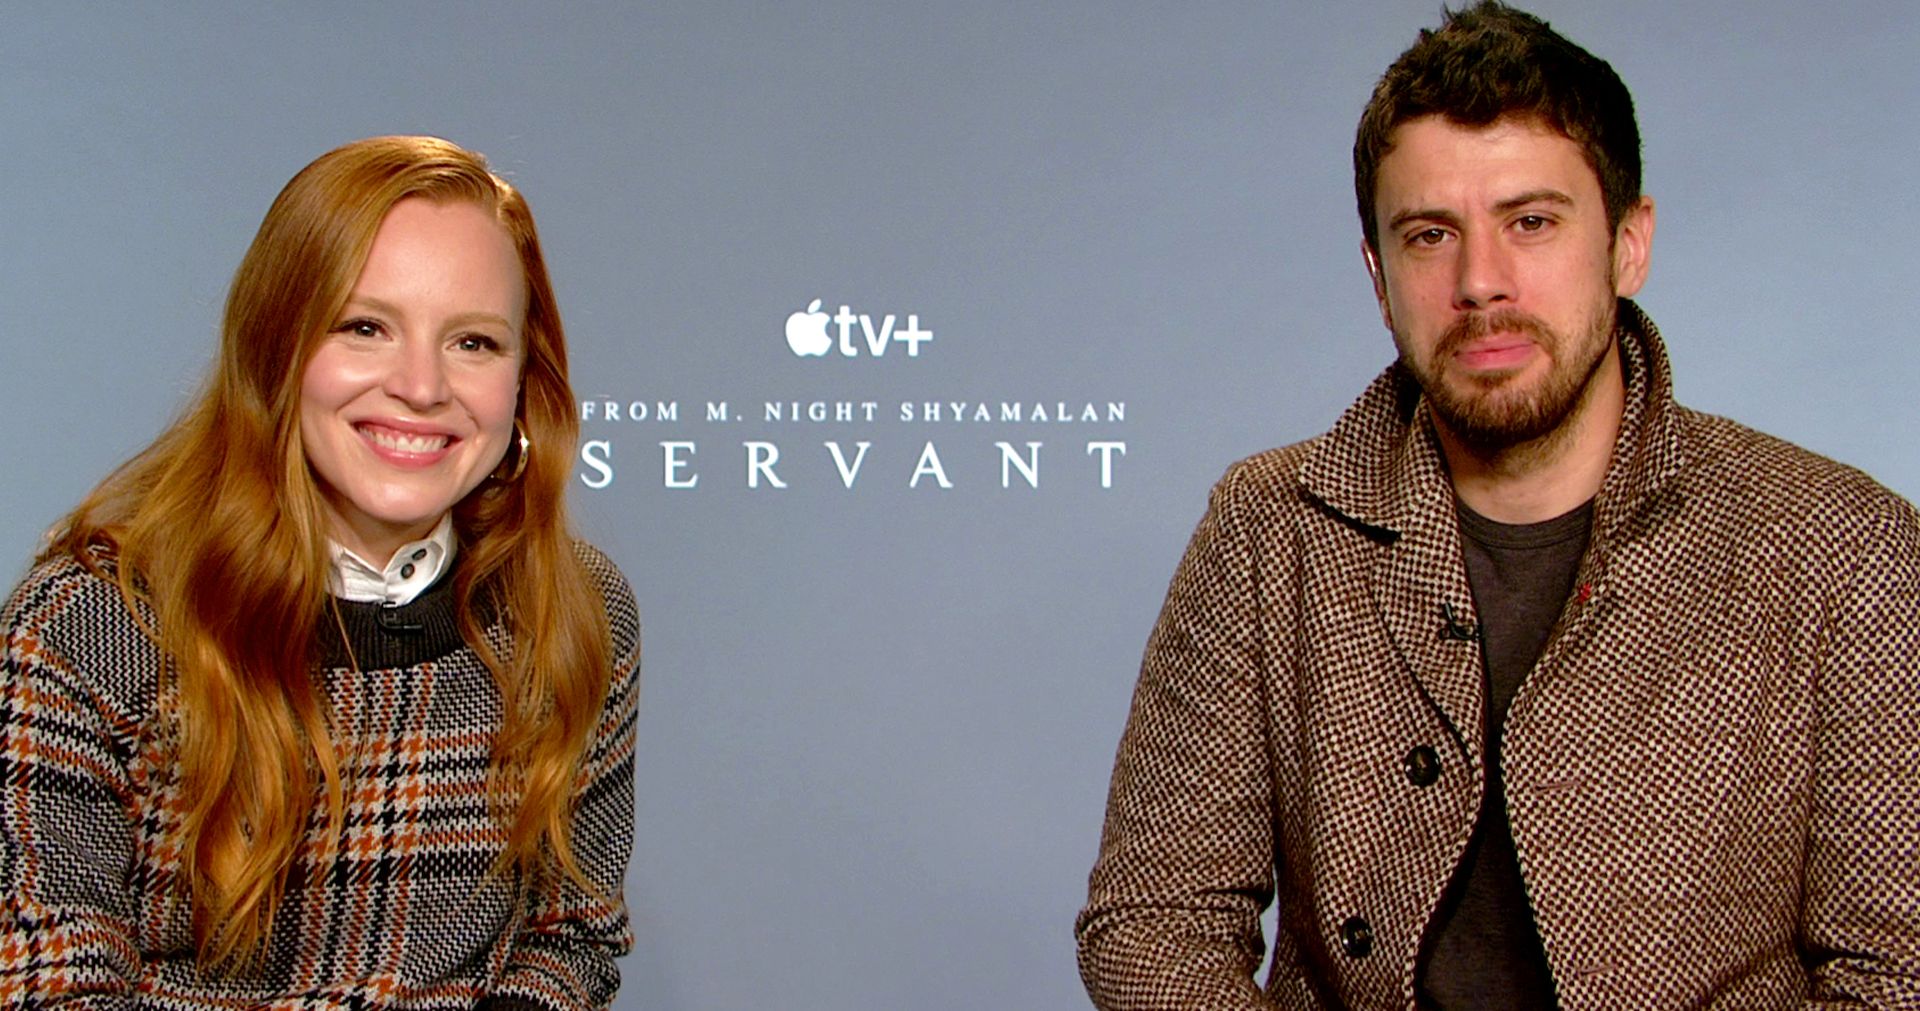 M. Night Shyamalan's Servant: Toby Kebbell and Lauren Ambrose Talk About Getting Creepy [Exclusive]